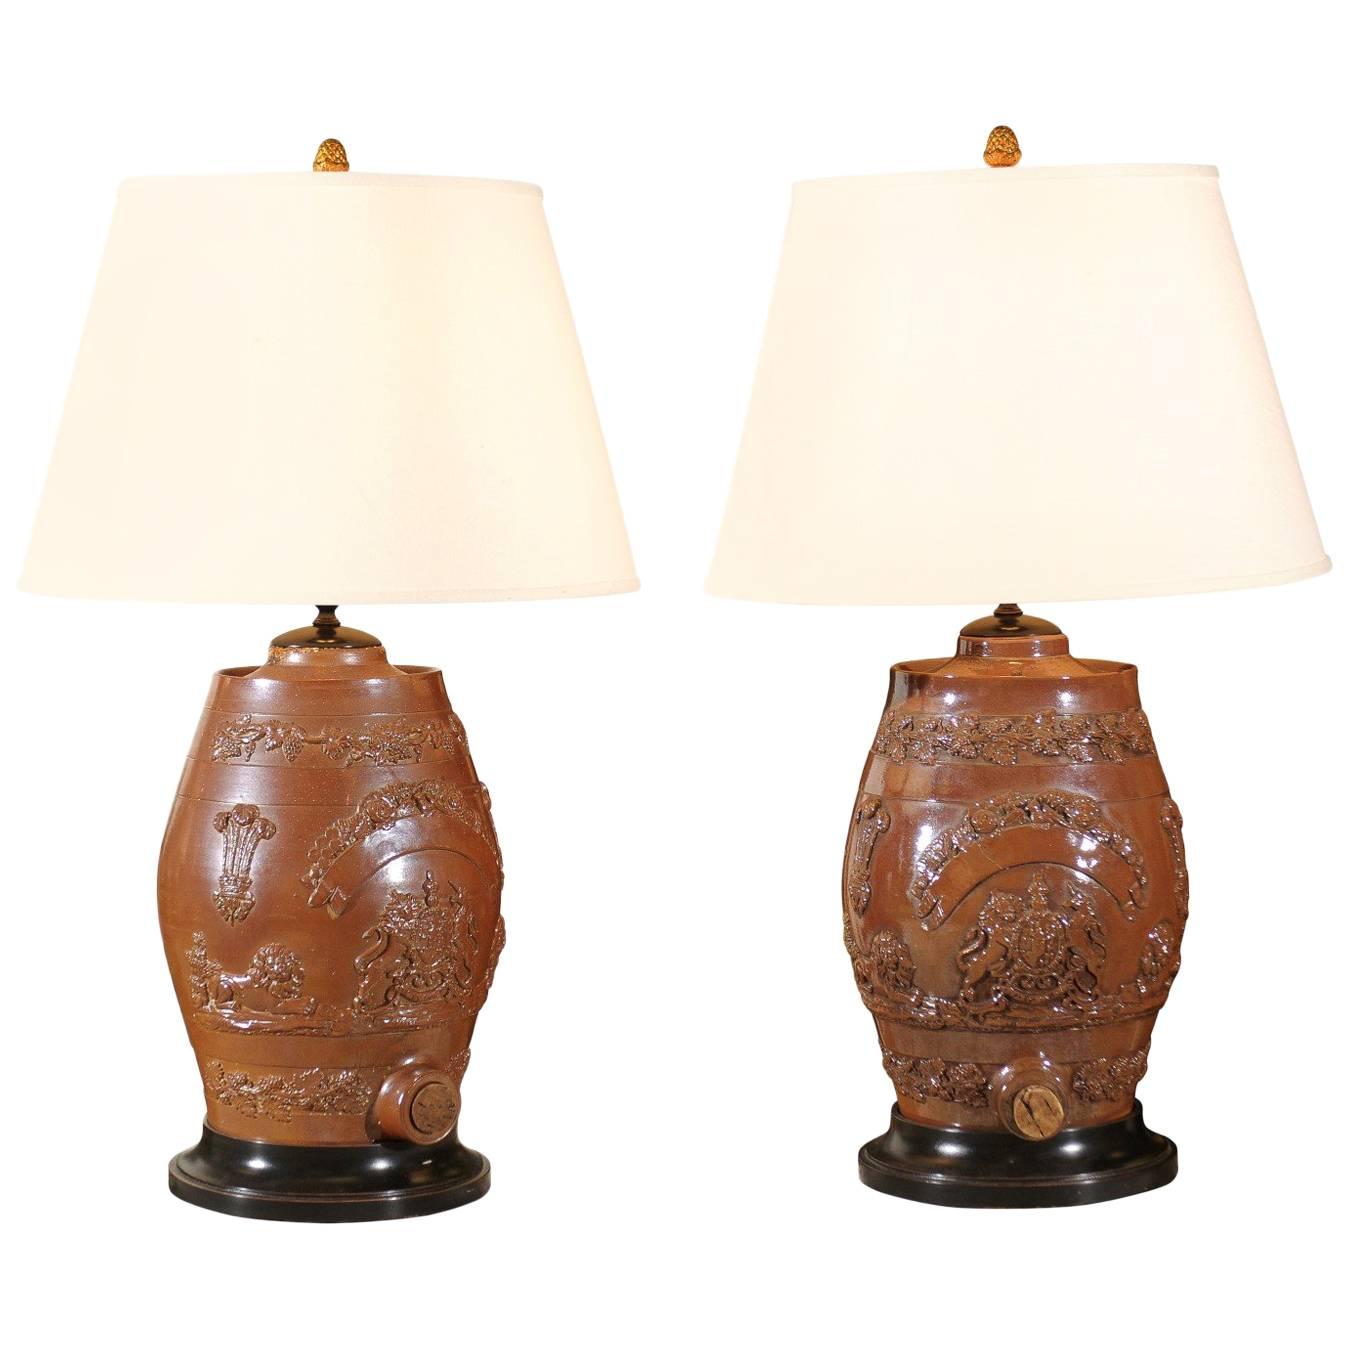 Pair of English Salt Glazed Water Filter Lamps